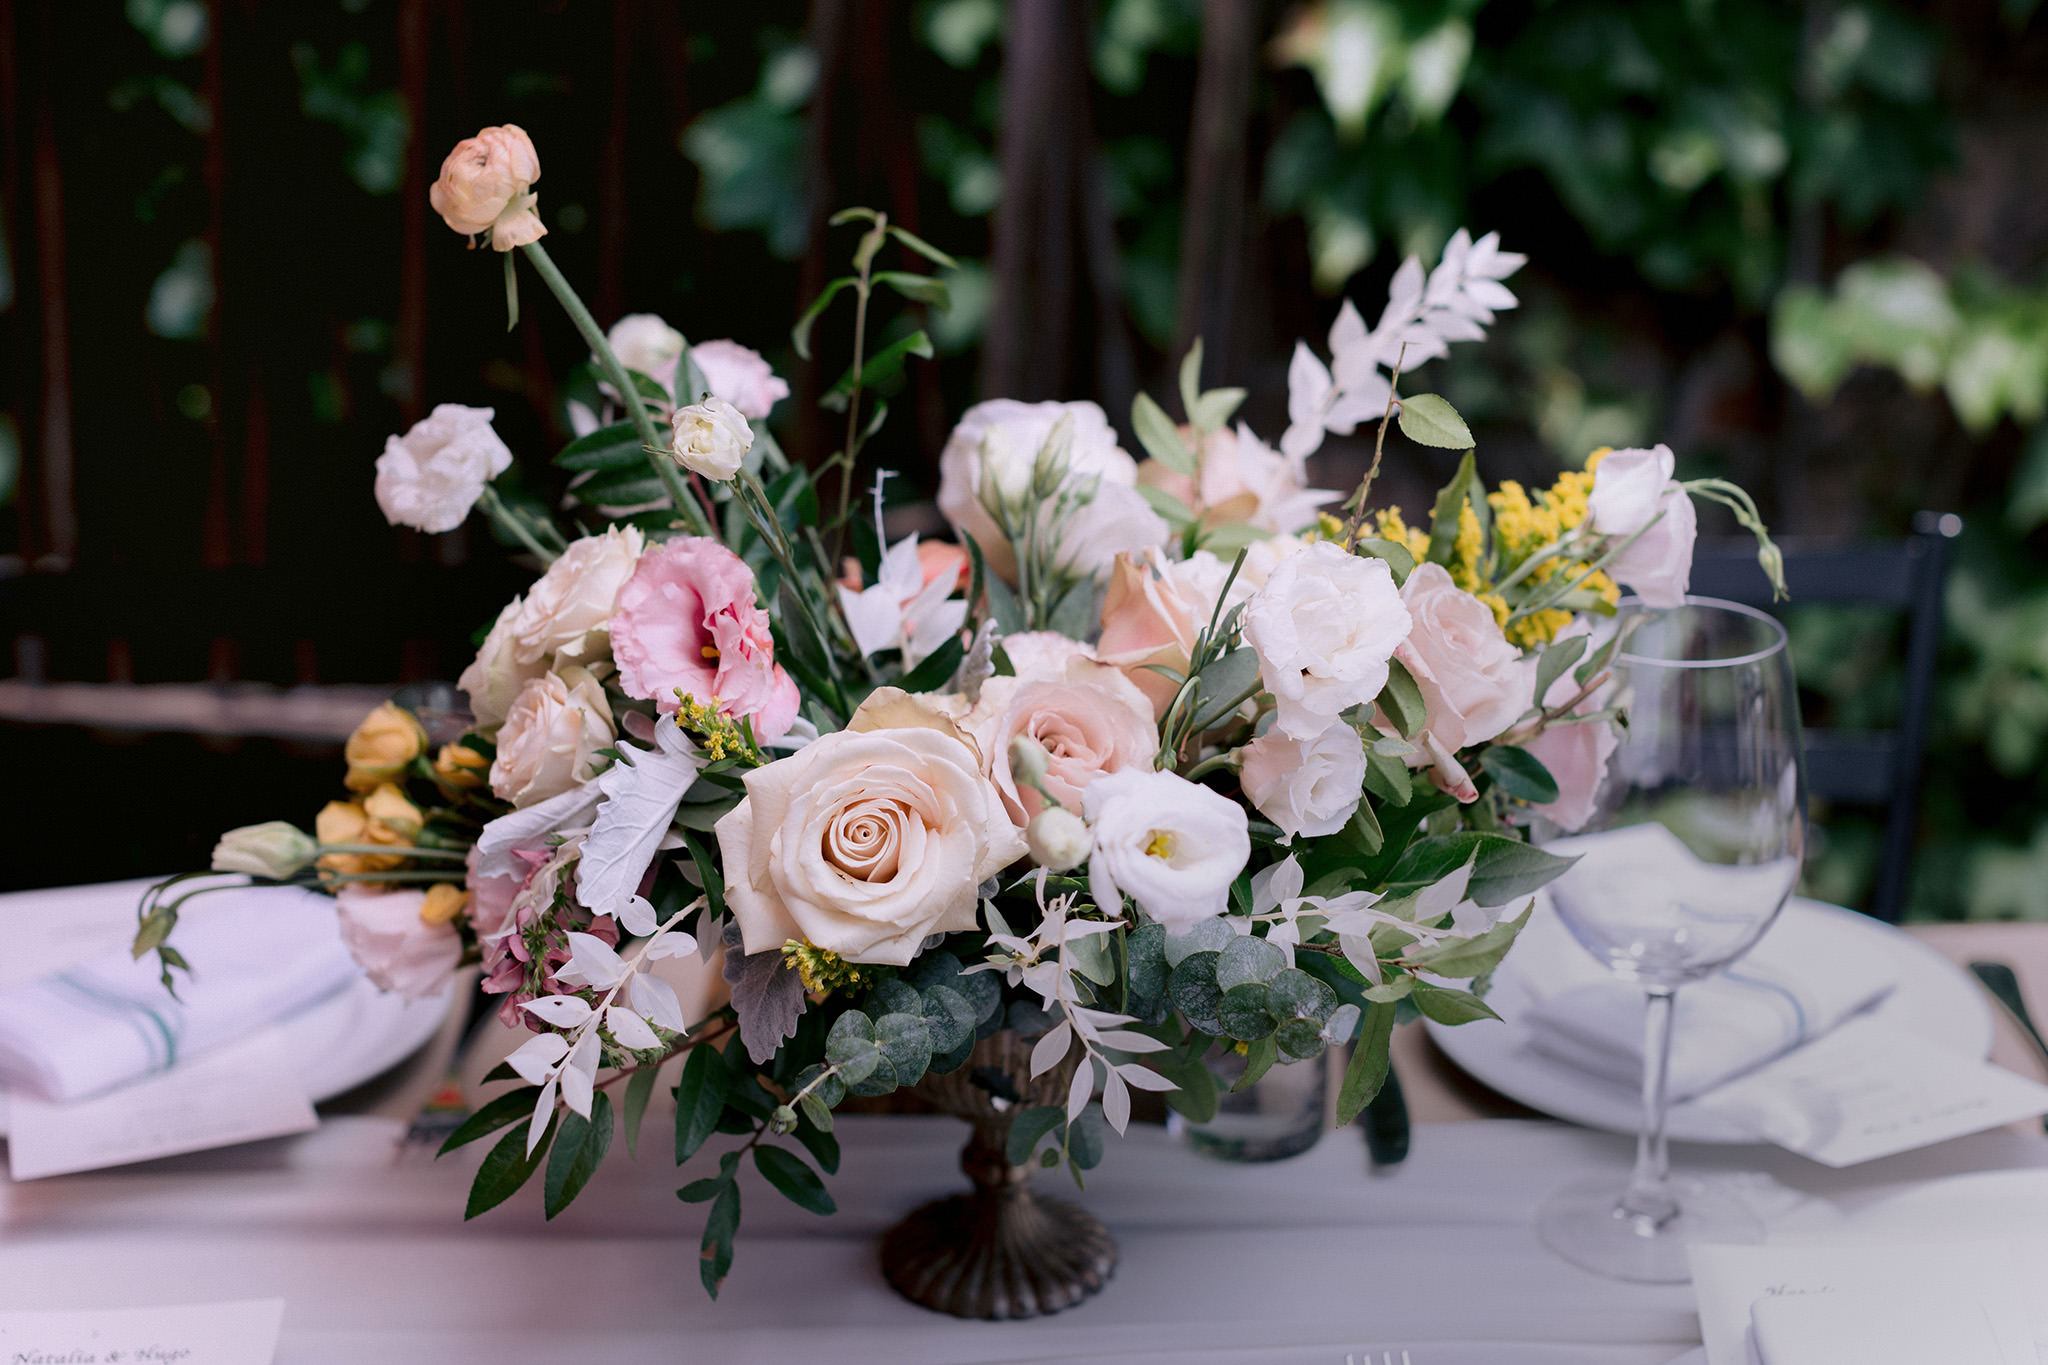 Roses and greenery as a wedding center piece